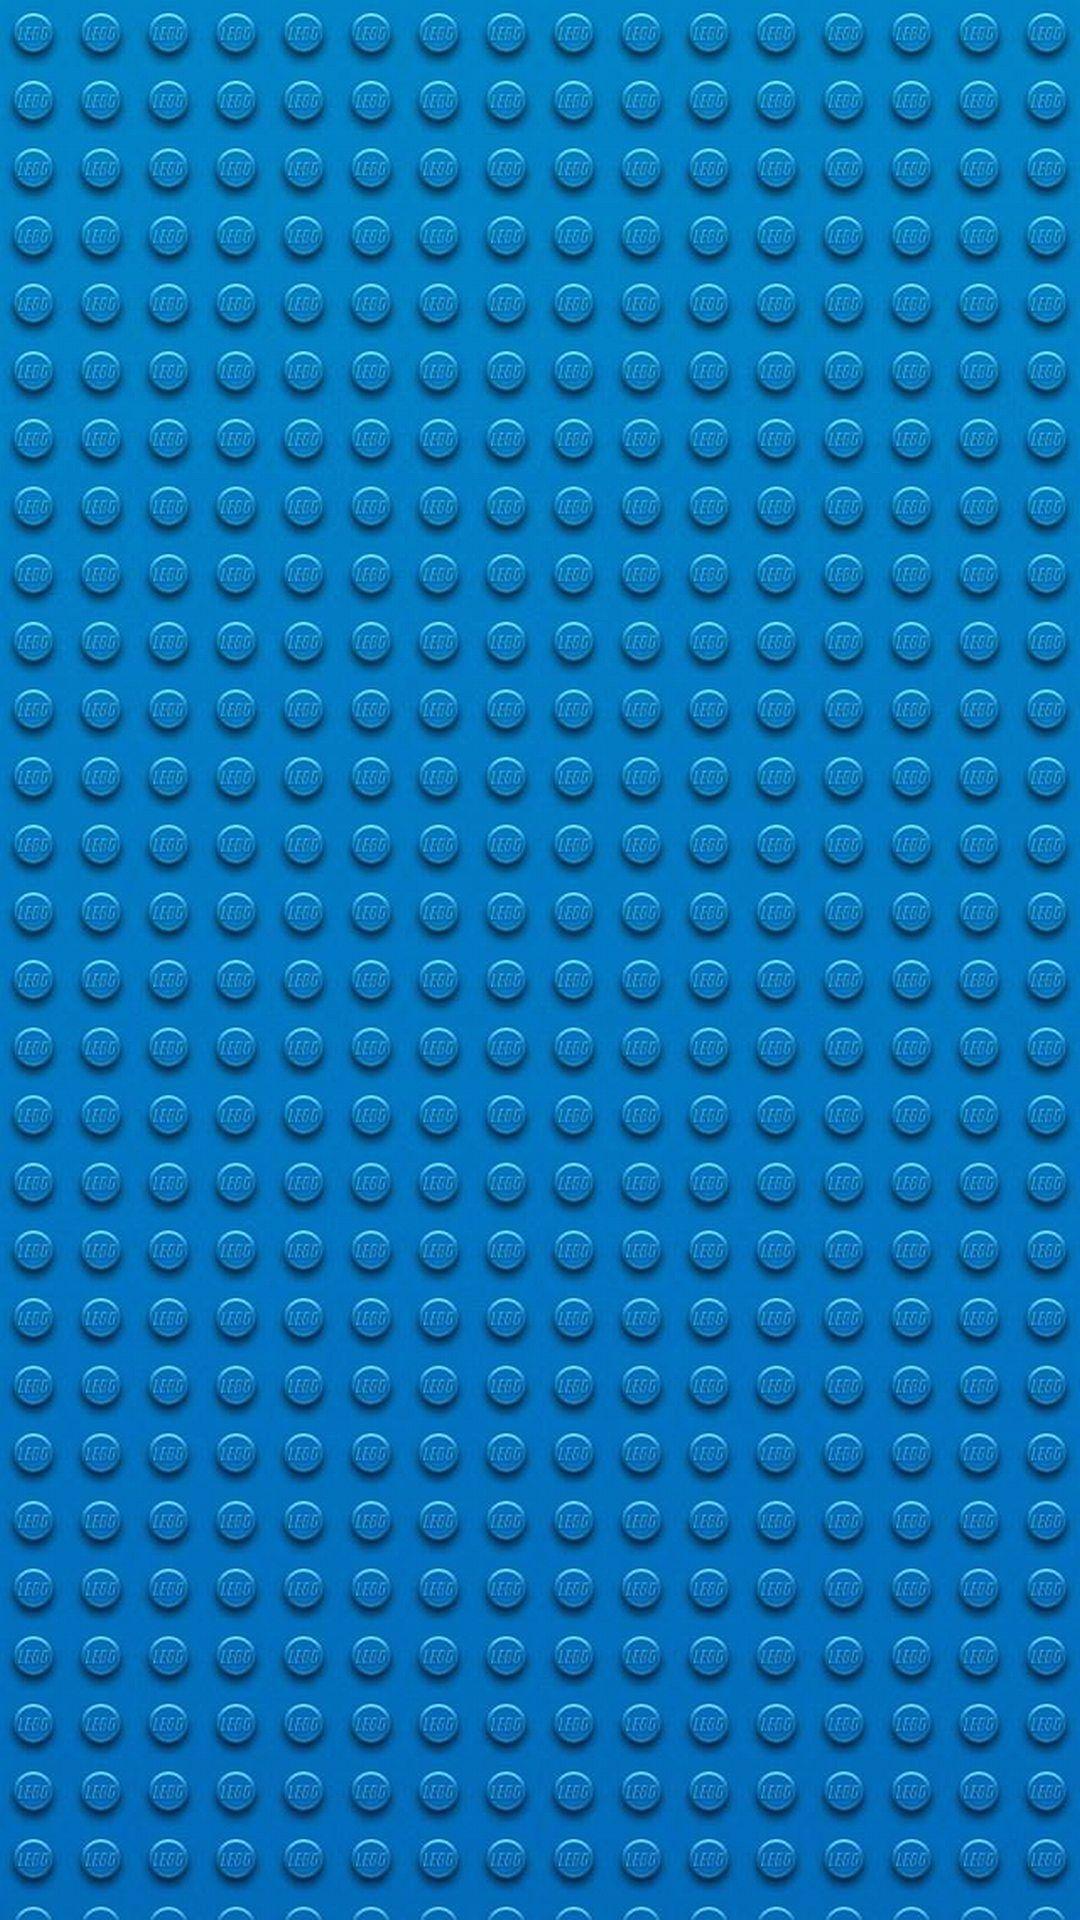 iPhone Apple Lego Wallpapers - Wallpaper Cave